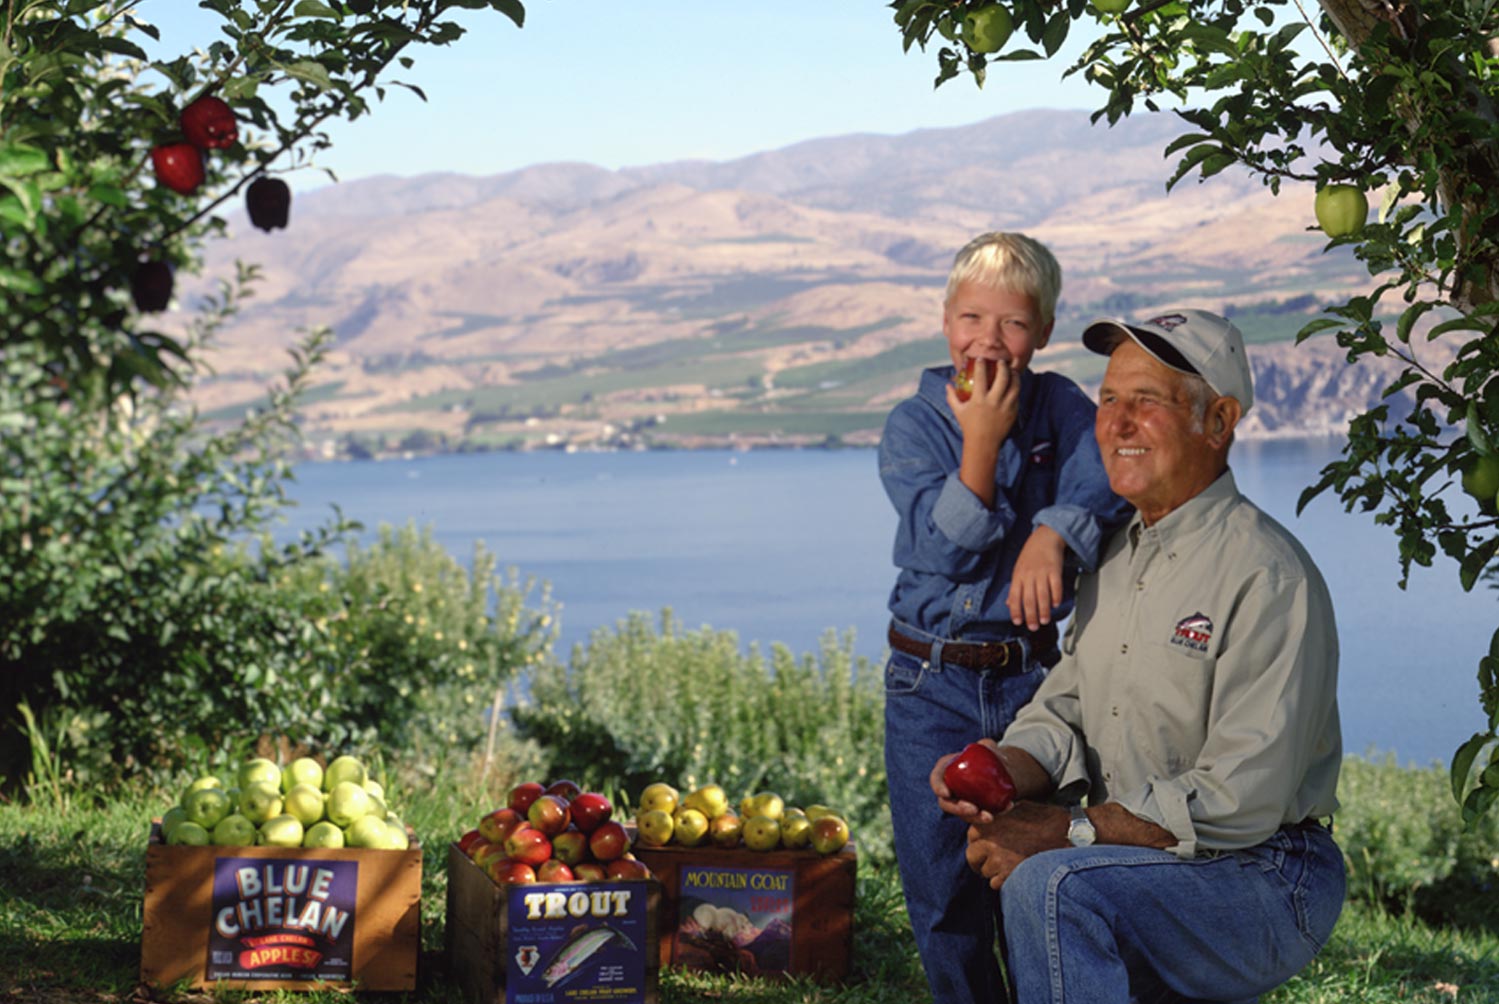 Organic Fuji Apples  Order Online From a Local Family Farm – Chelan Ranch